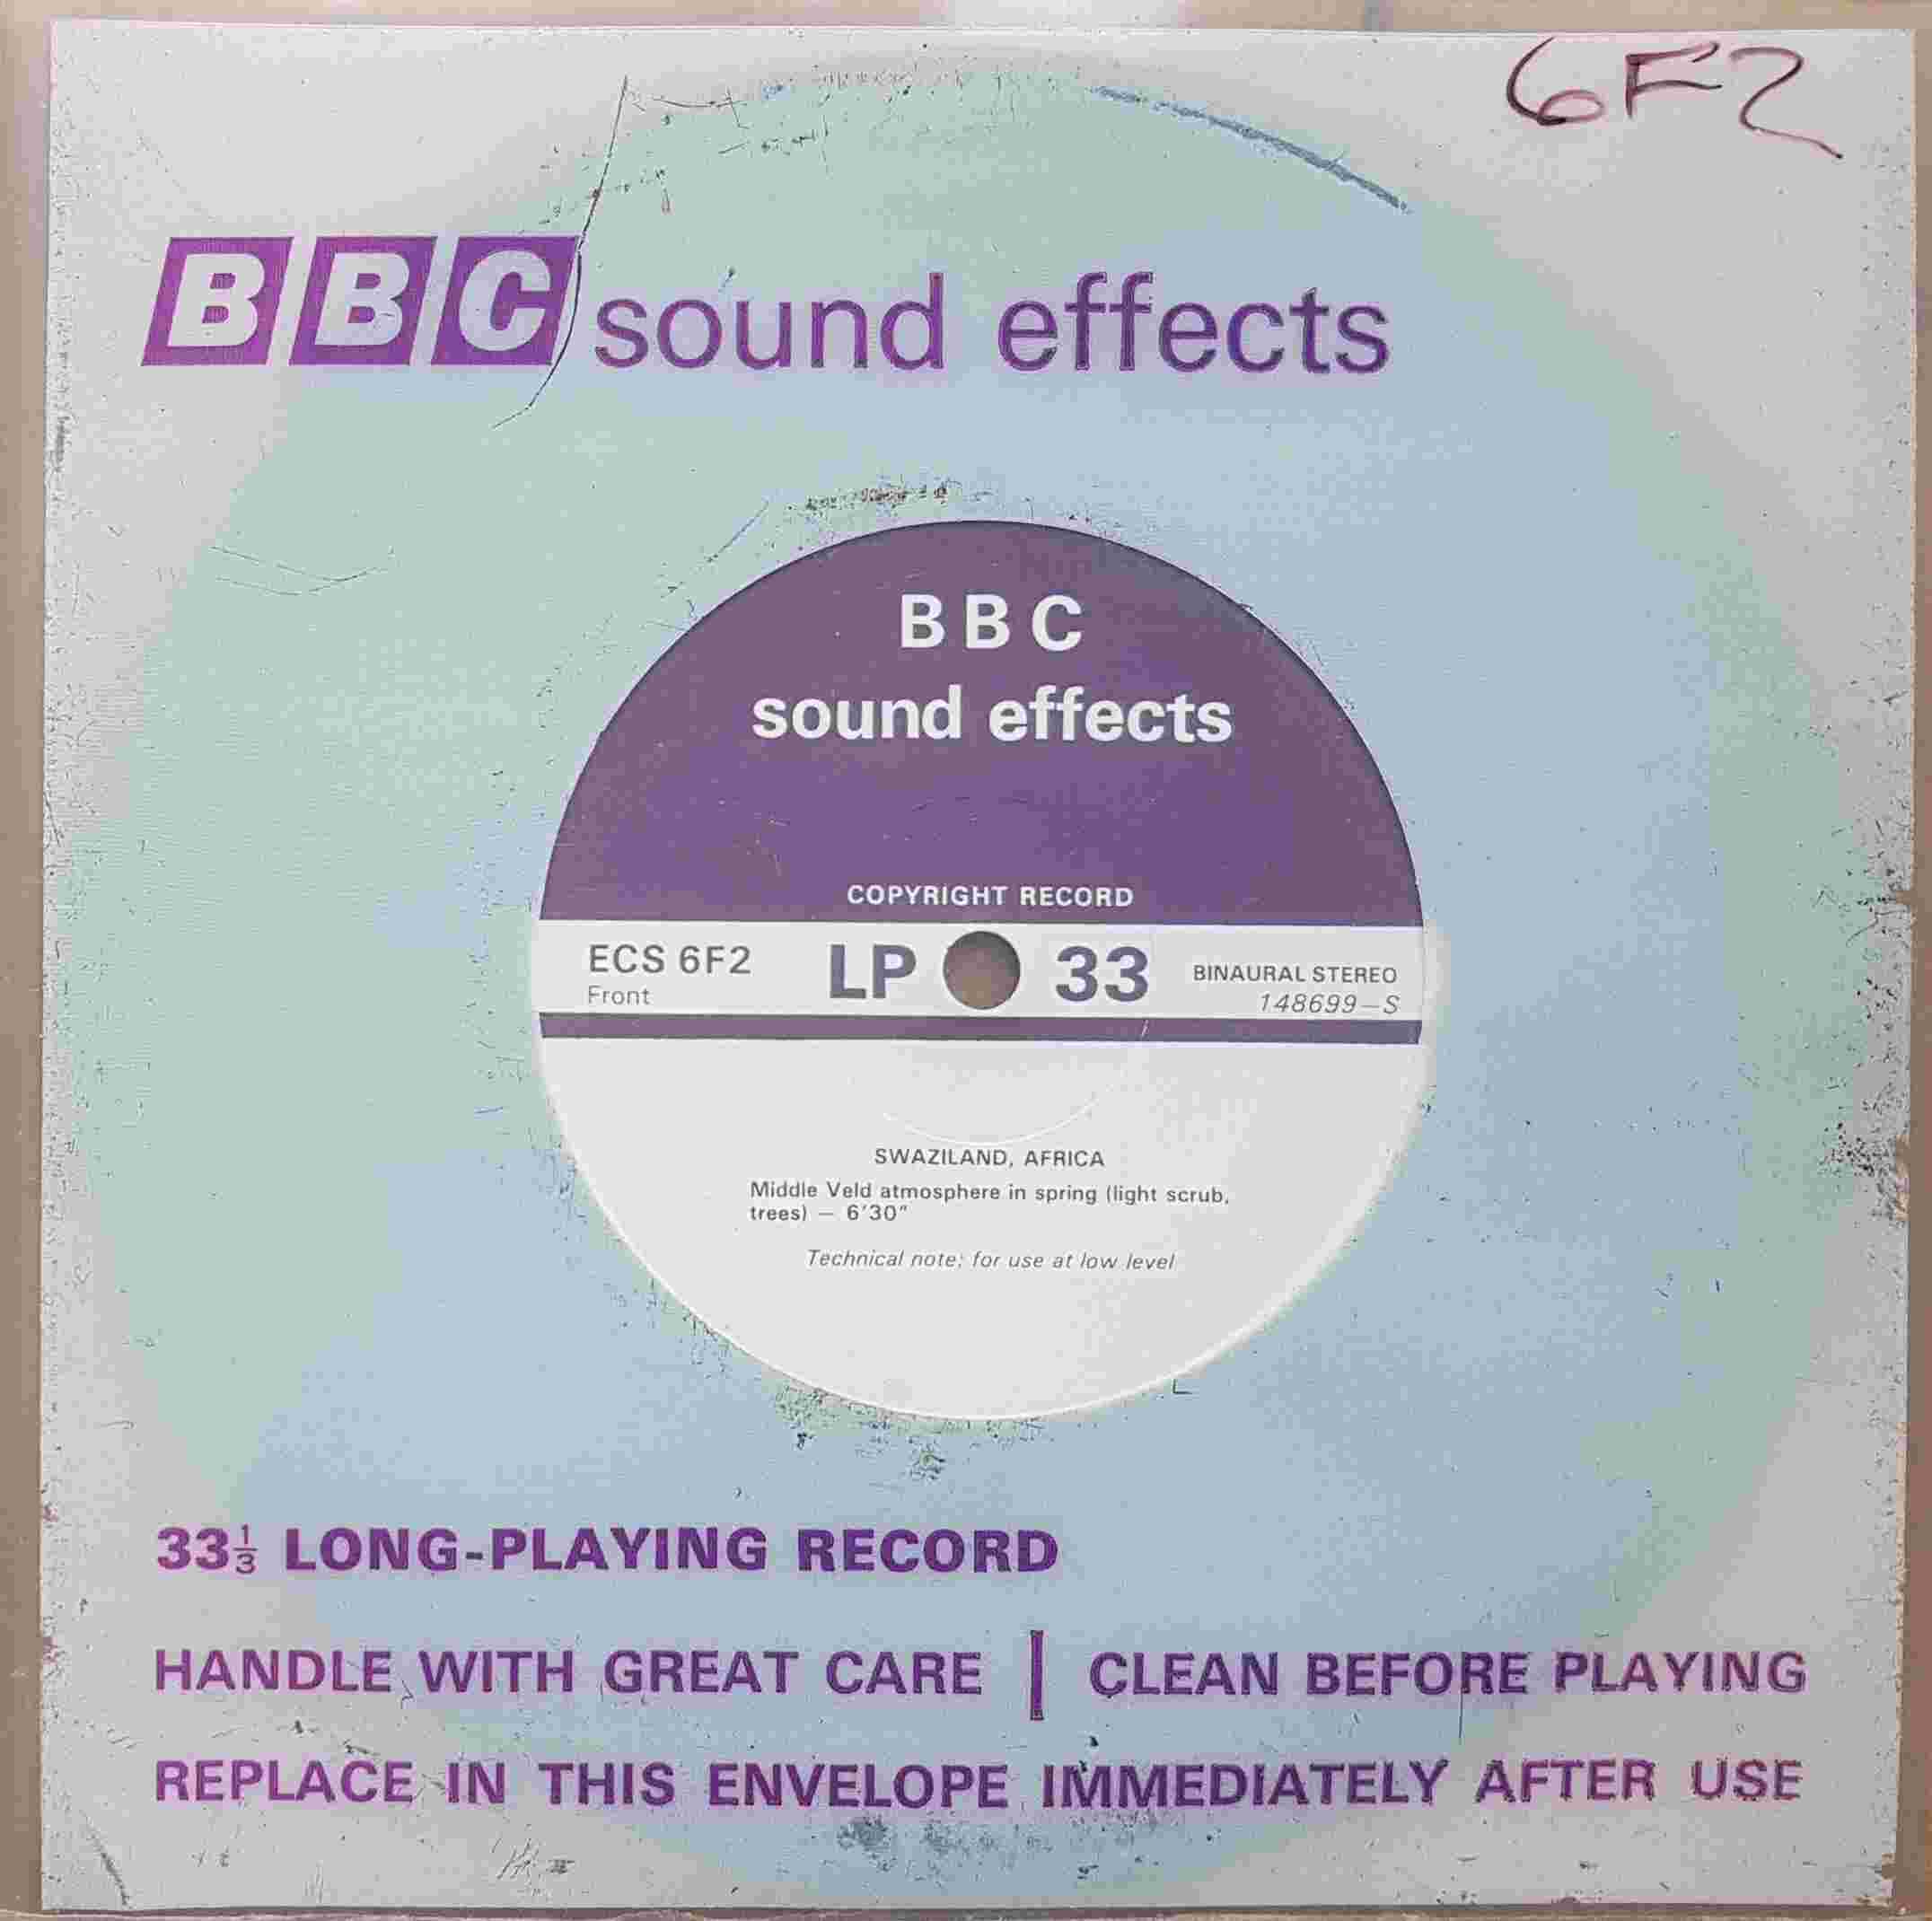 Picture of ECS 6F2 Swaziland, Africa by artist Not registered from the BBC singles - Records and Tapes library